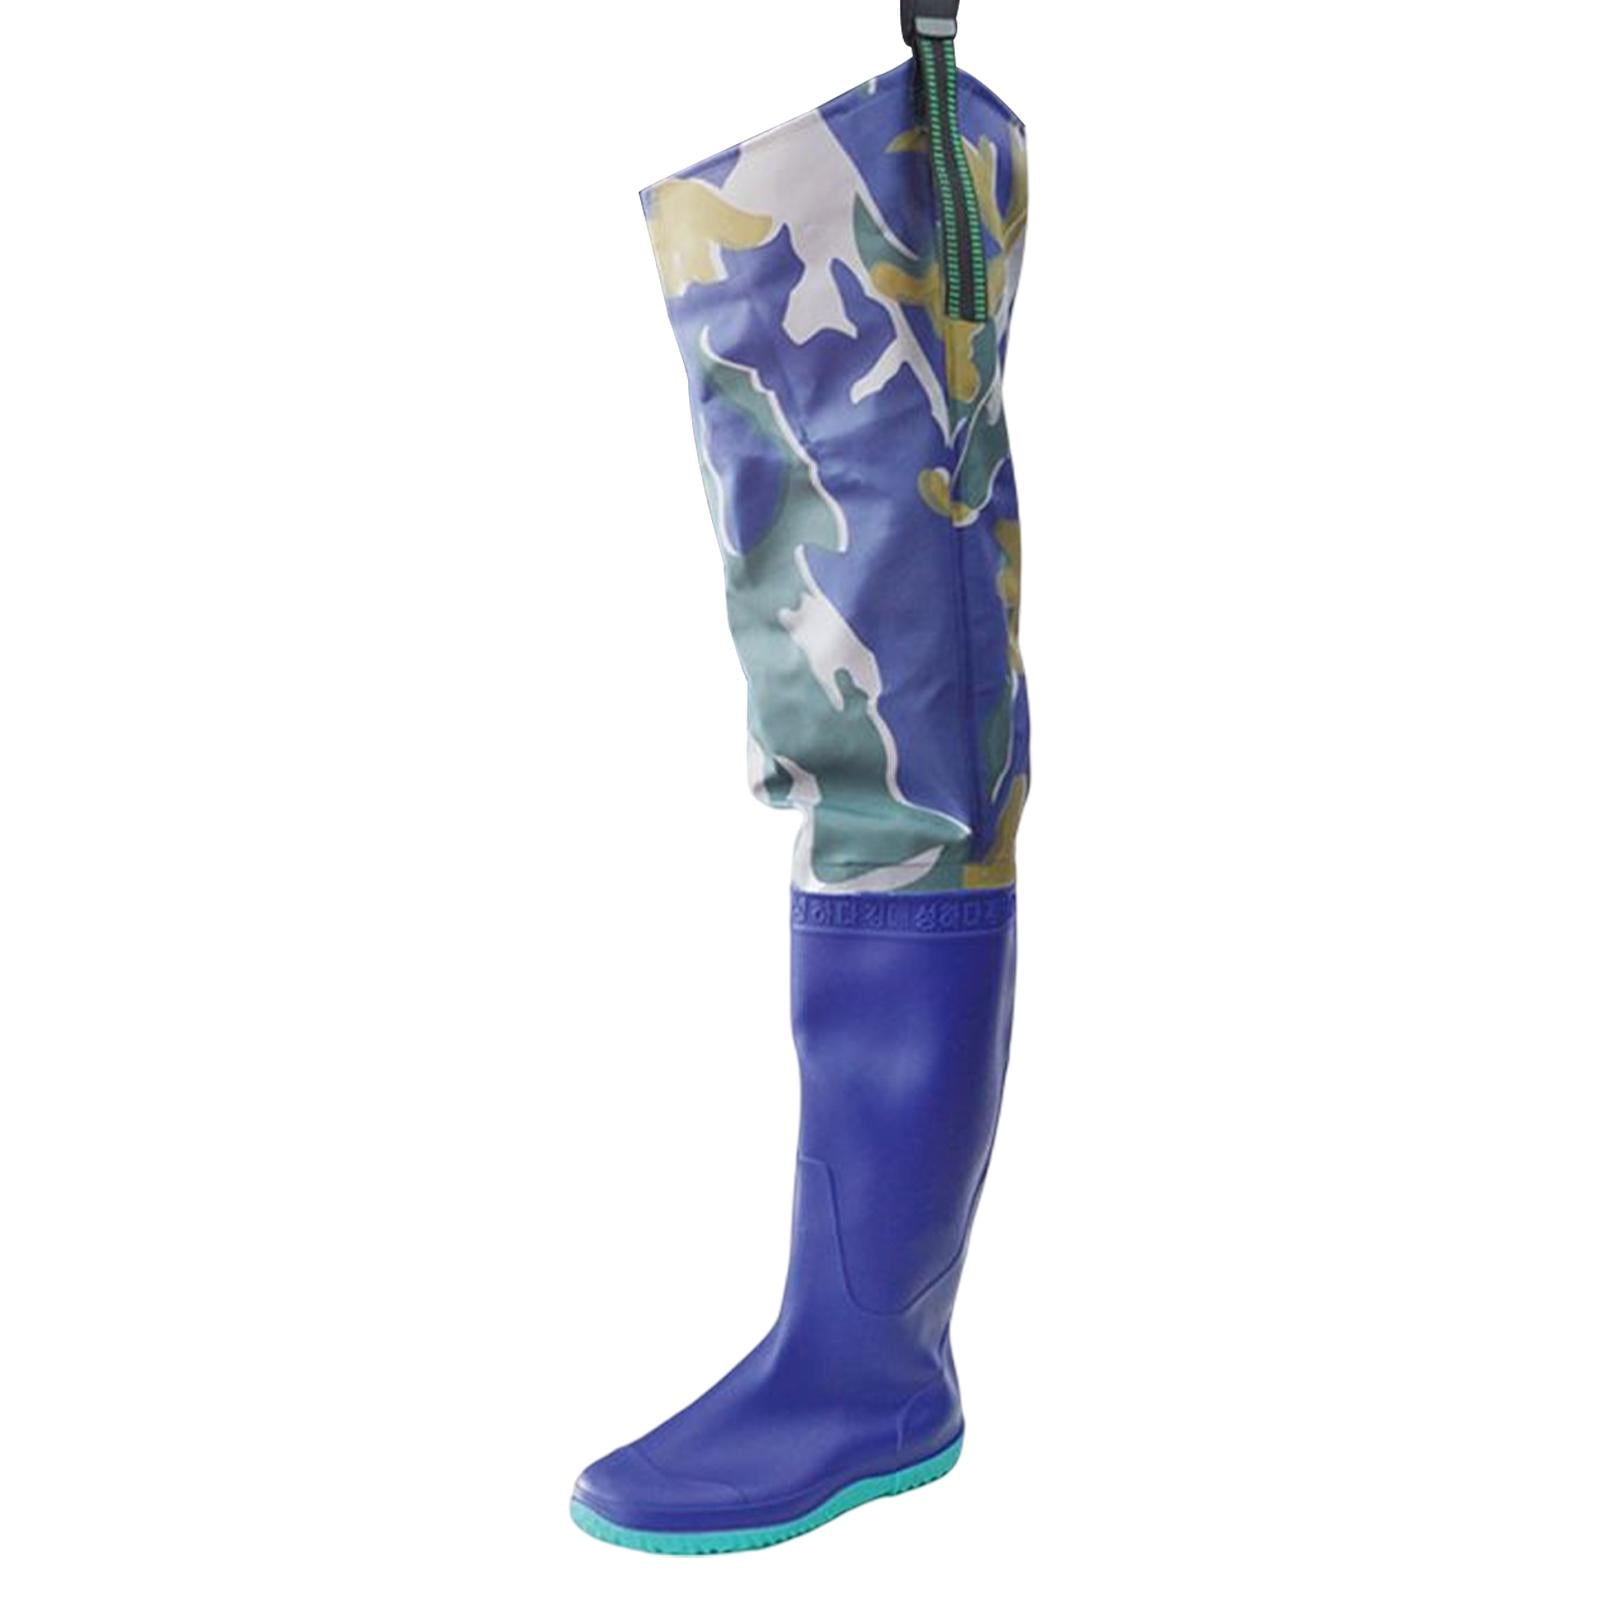 Hip Waders, Waterproof Wading Hip Boots for Men and Women